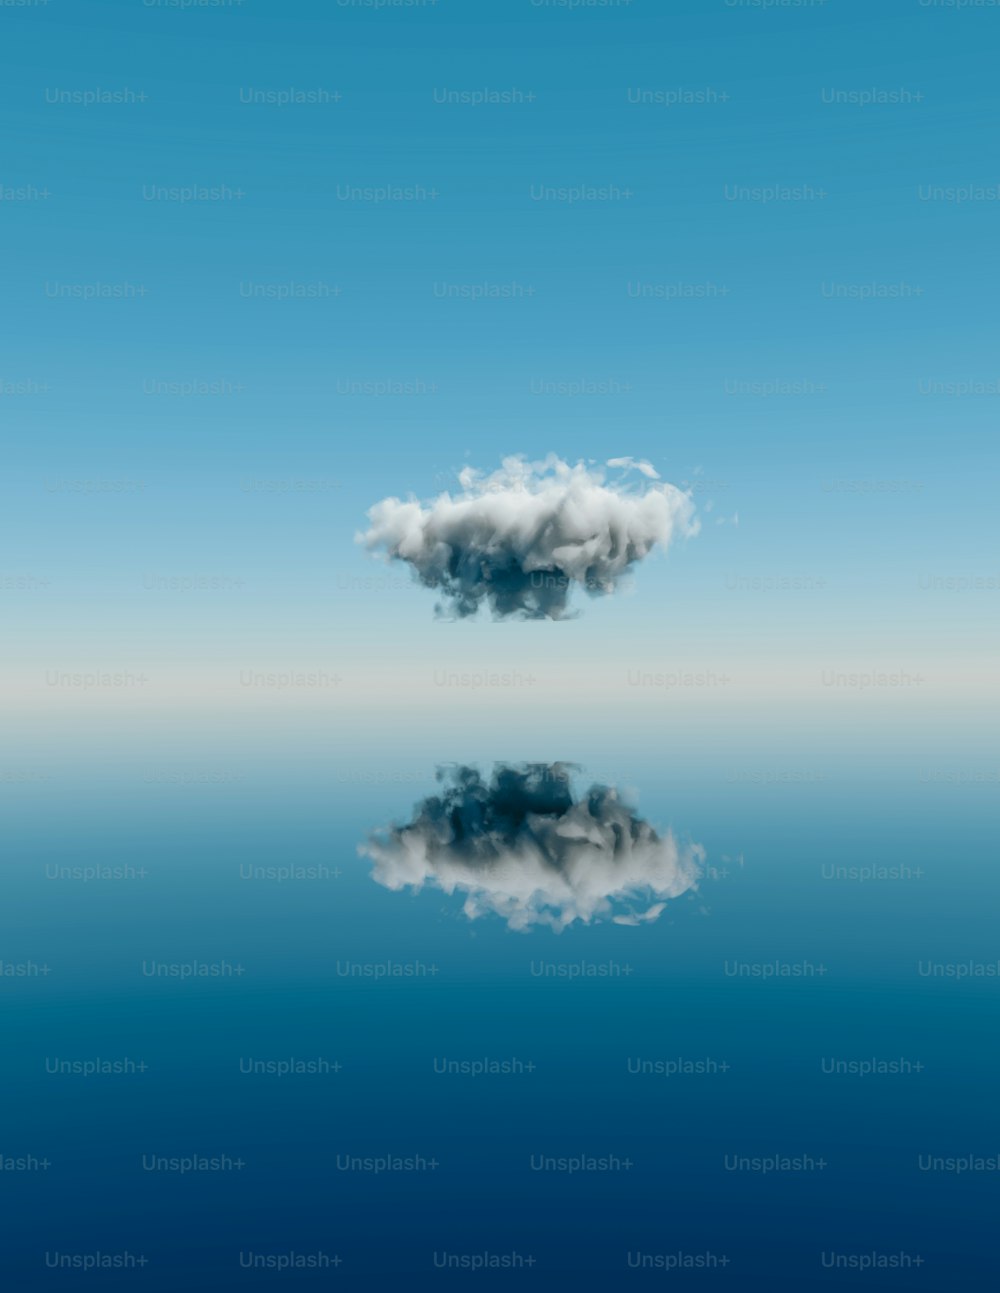 a cloud floating in the sky over a body of water